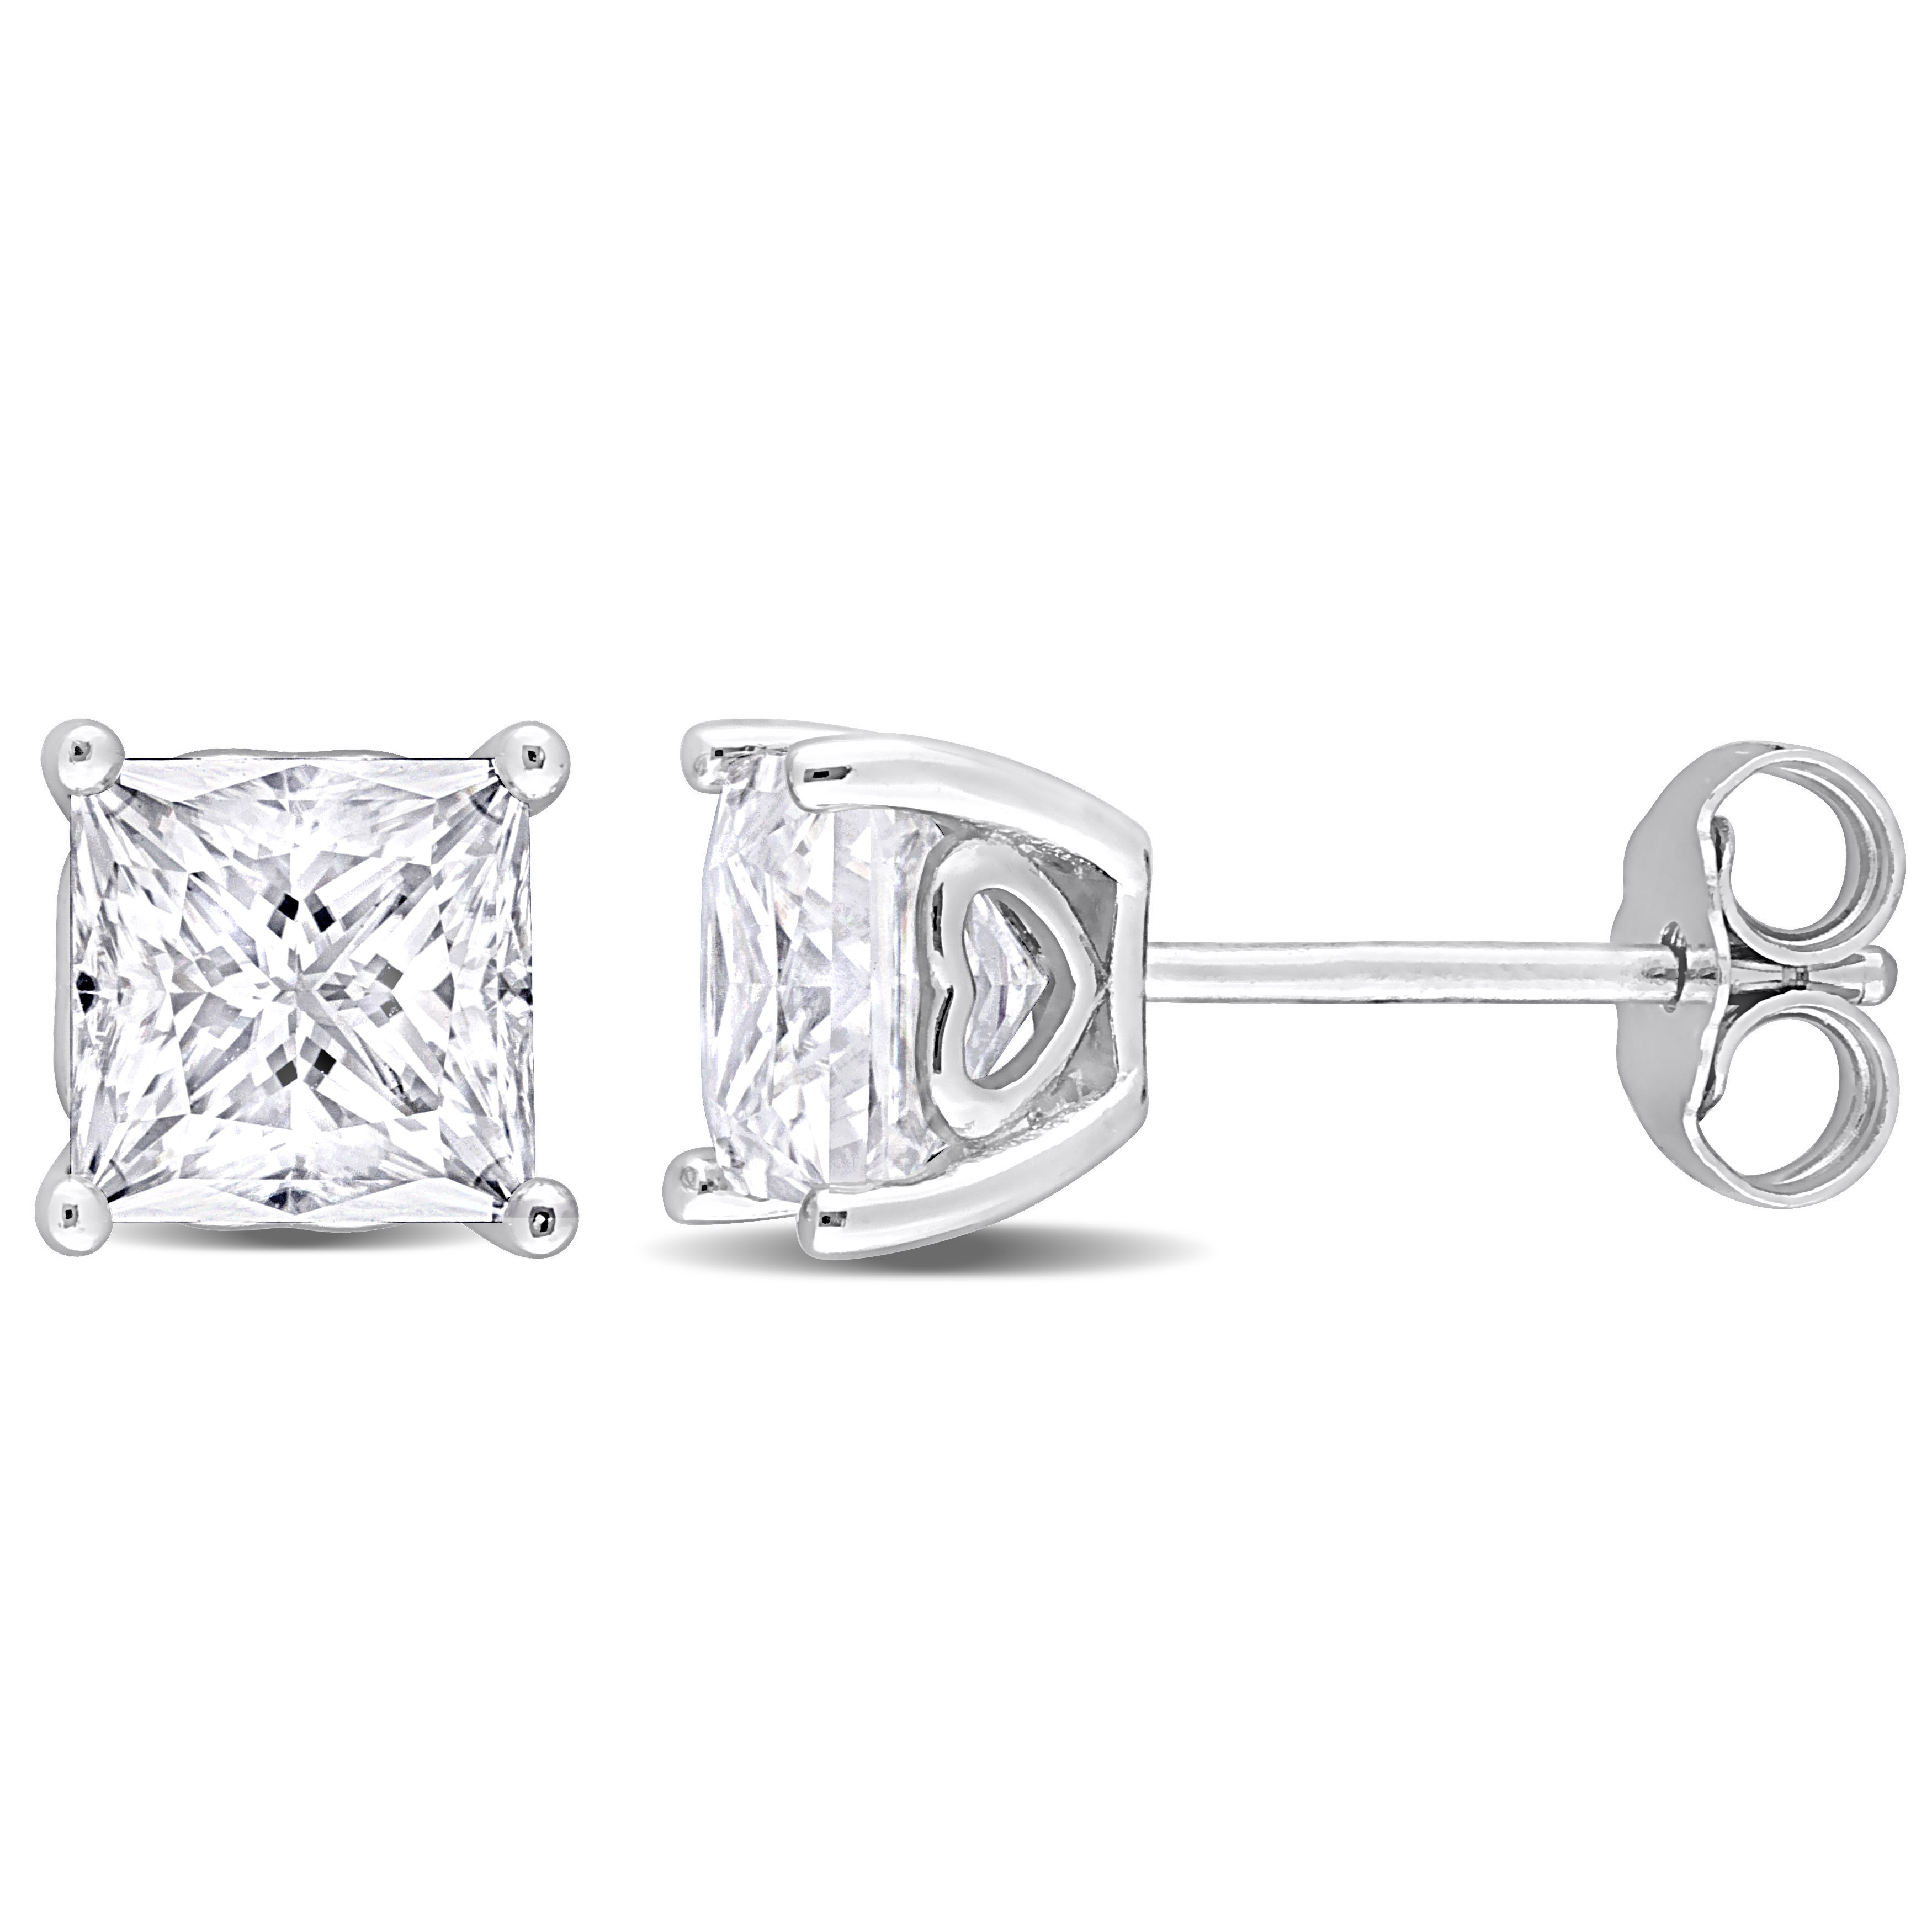 2 1/2 CT TGW Square Created Moissanite Stud Earrings in Sterling Silver